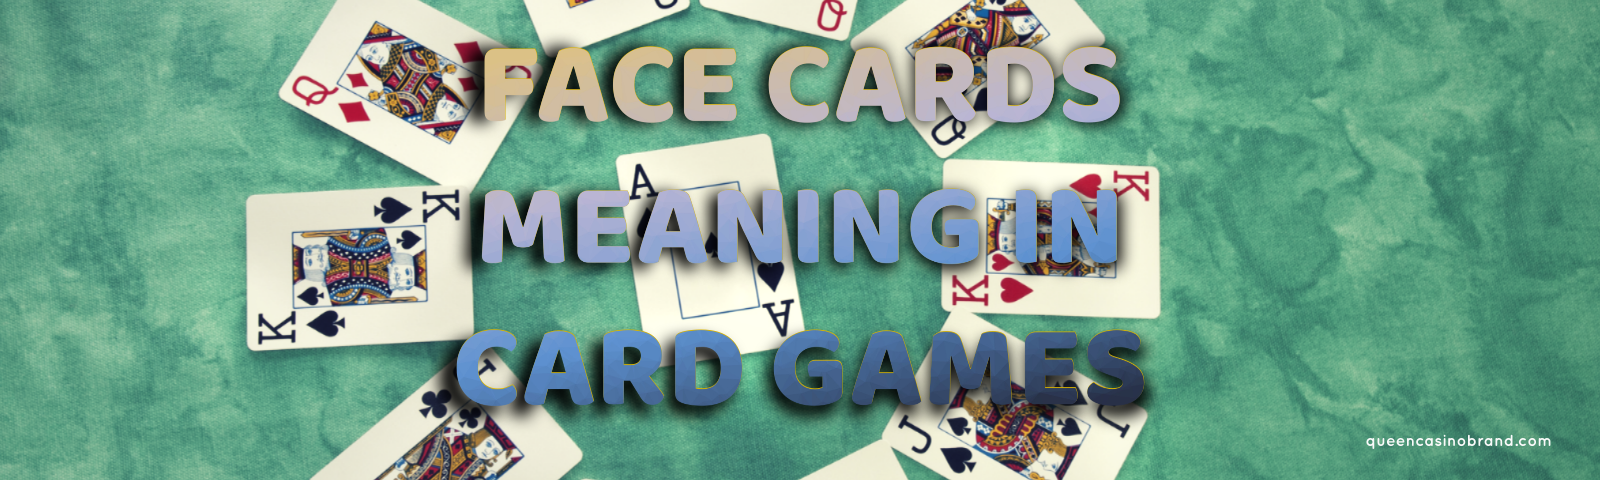 Face Cards Meaning in Card Games | Queen Casino Brand